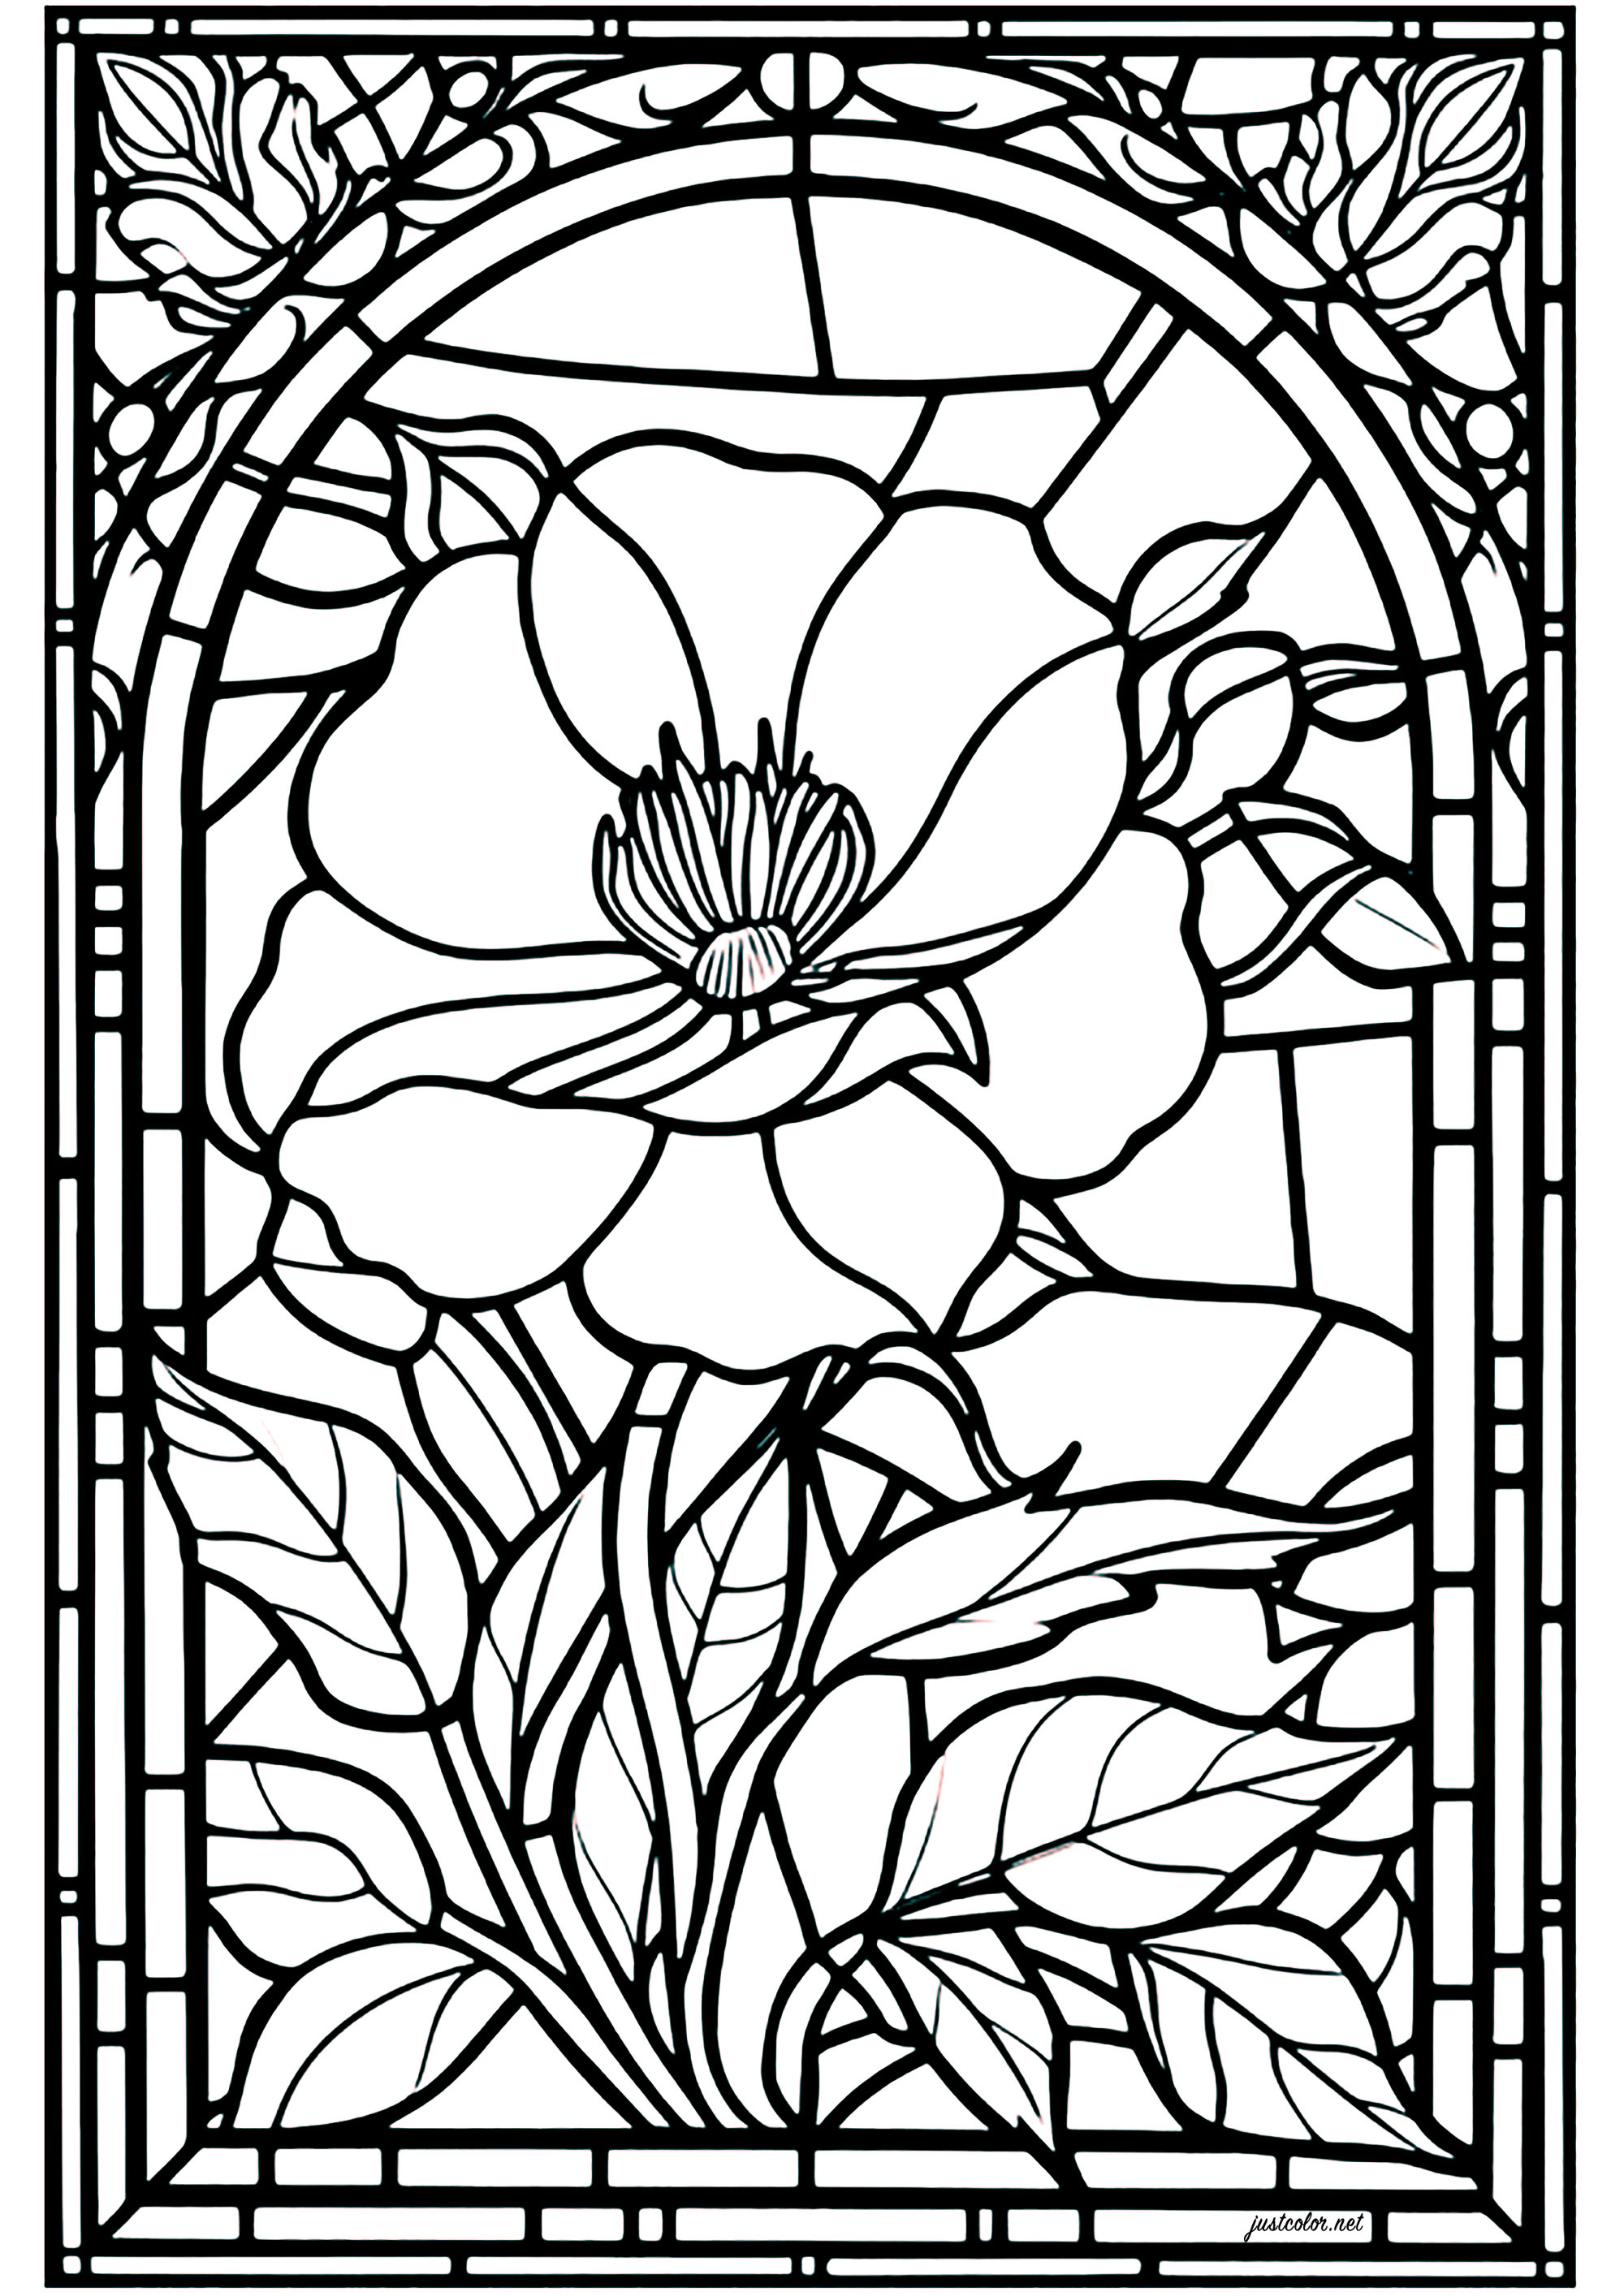 Coloring a stained-glass window with a pretty flower as the main subject